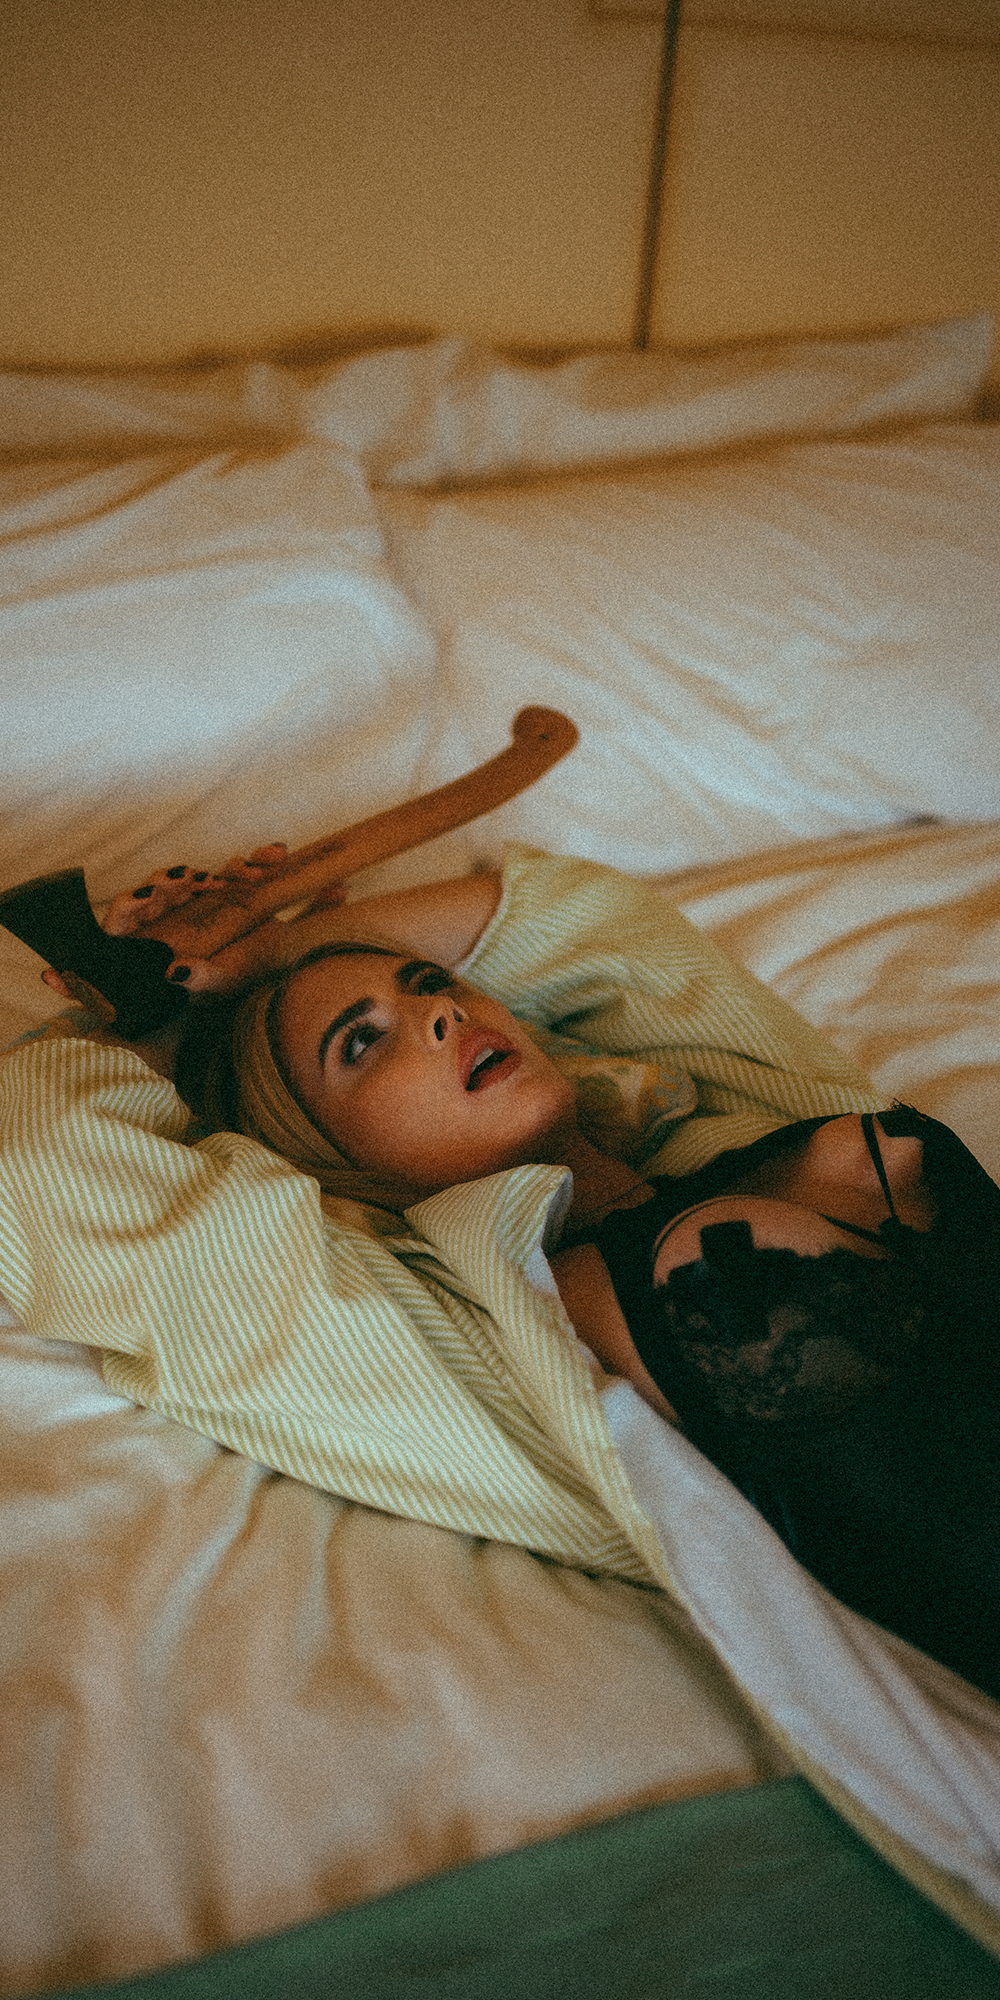 lucy hart holding a hatchet in bed